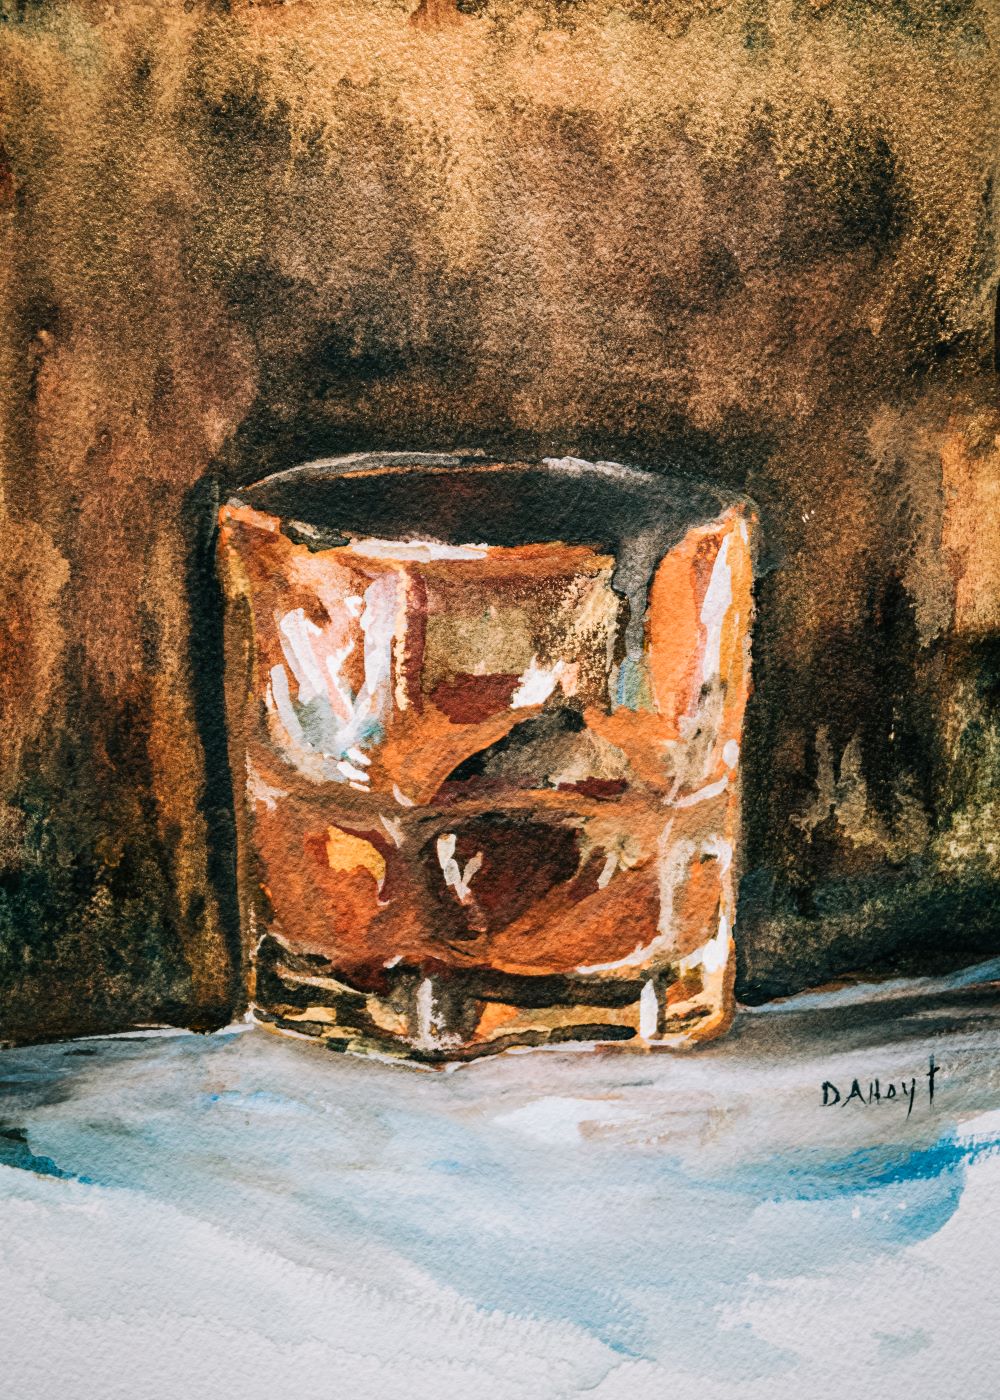 Bourbon abstract - Greeting Card